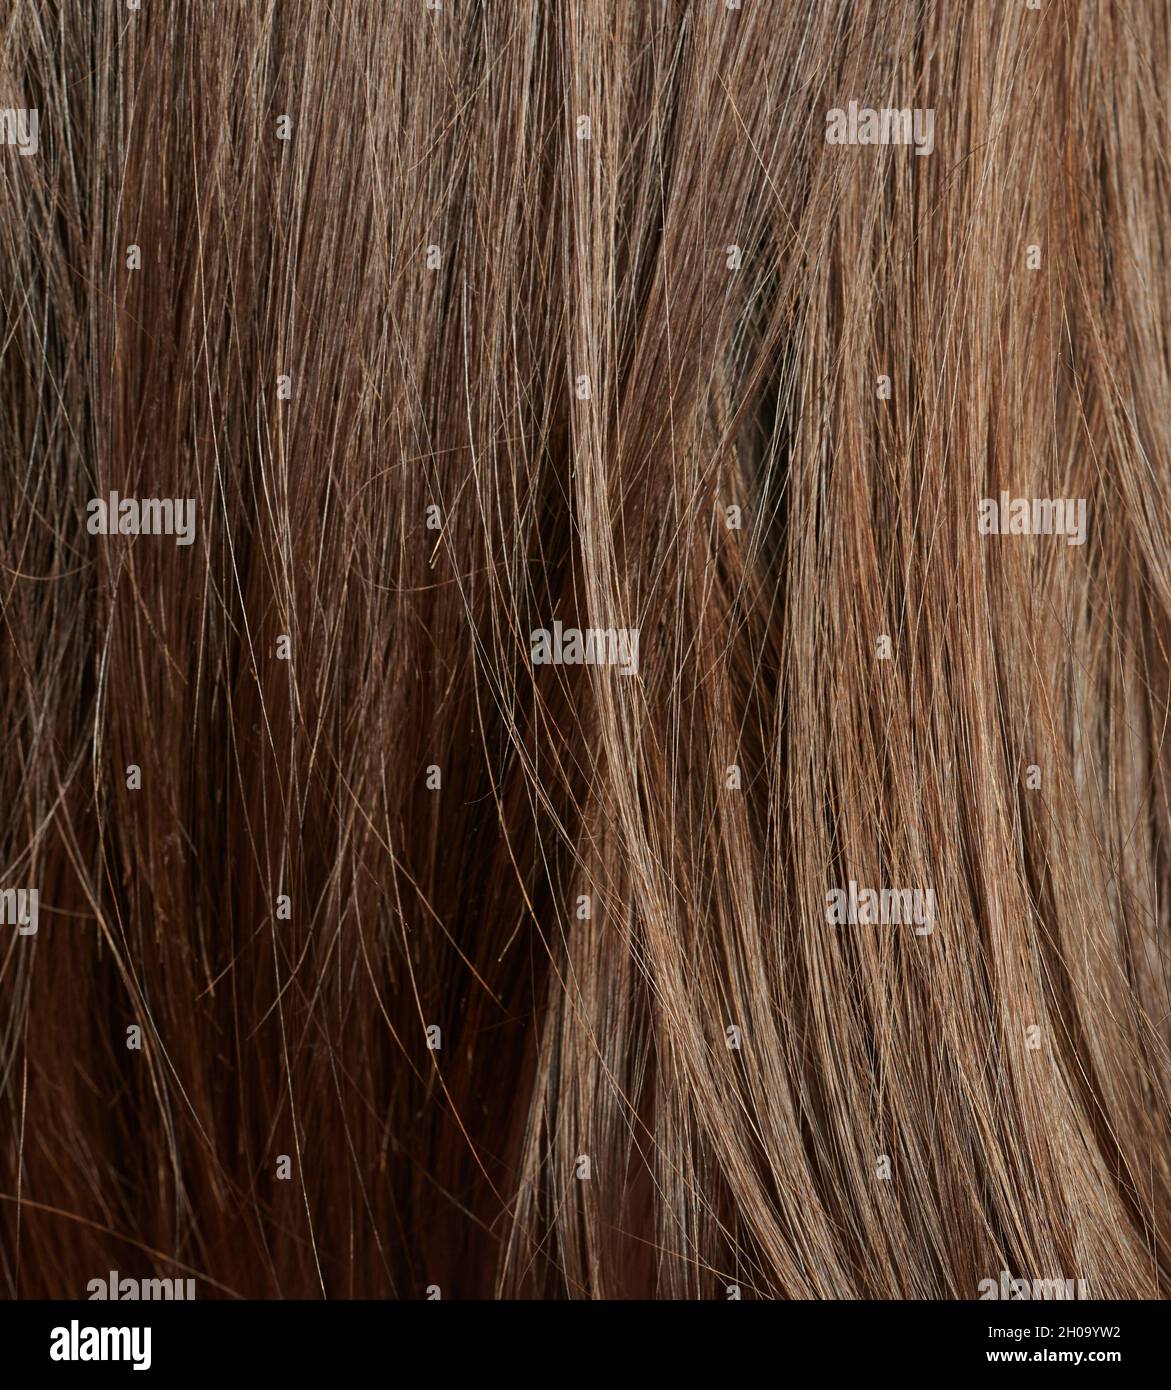 Light brown hair background. Shiny healthy hair Stock Photo